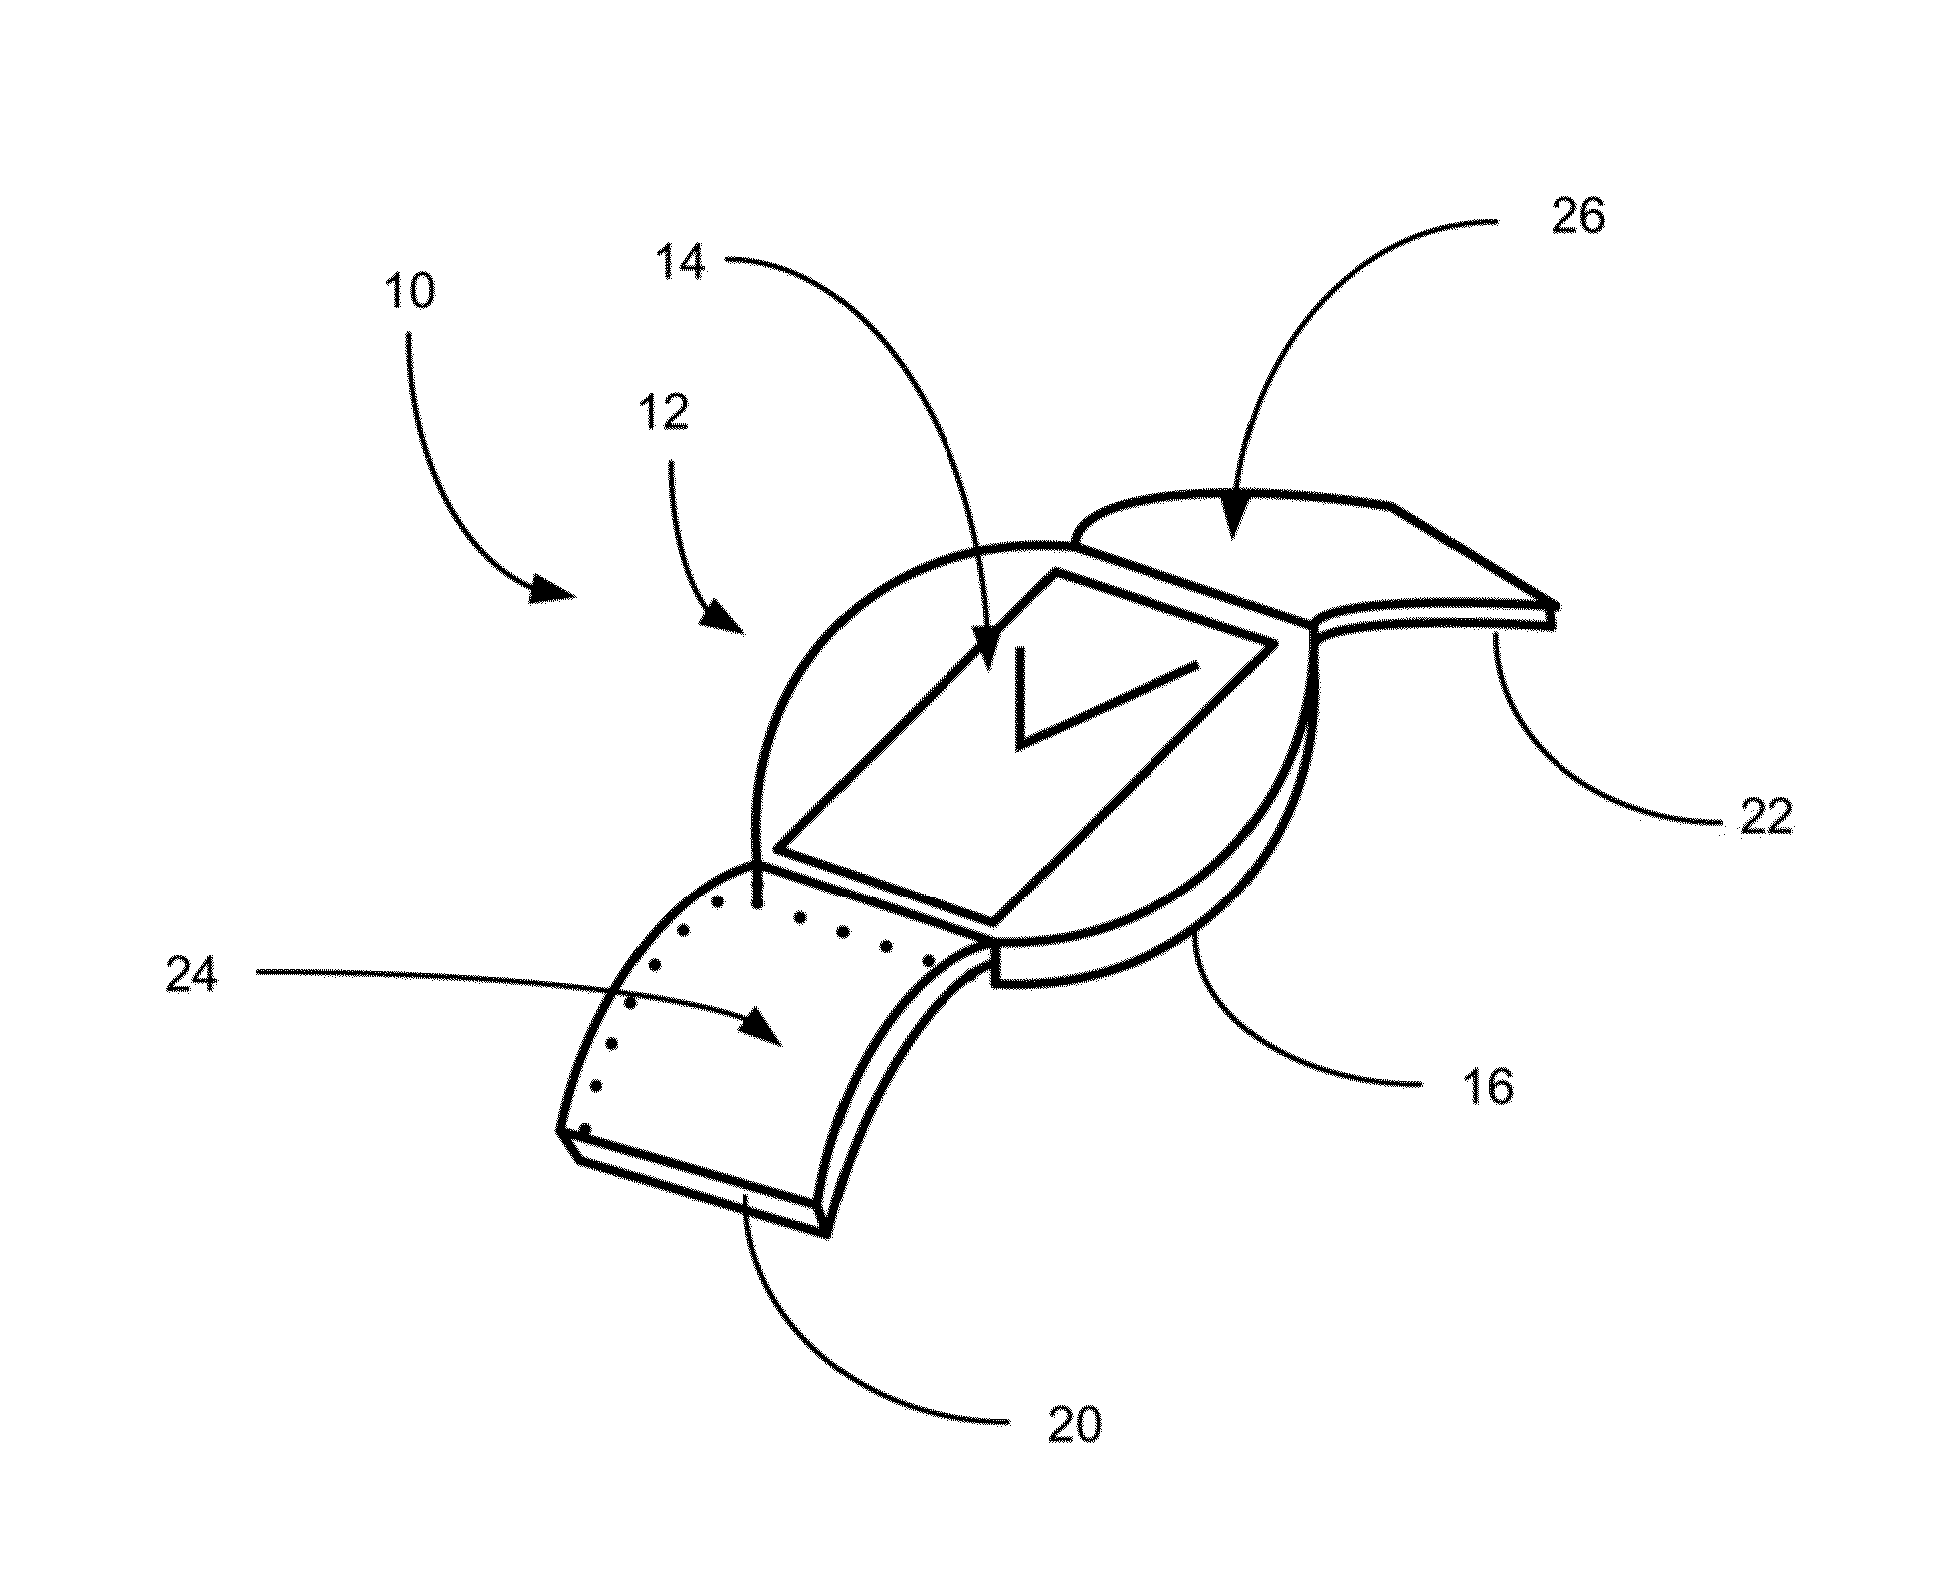 Mobile Communication Watch Utilizing Projected Directional Sound